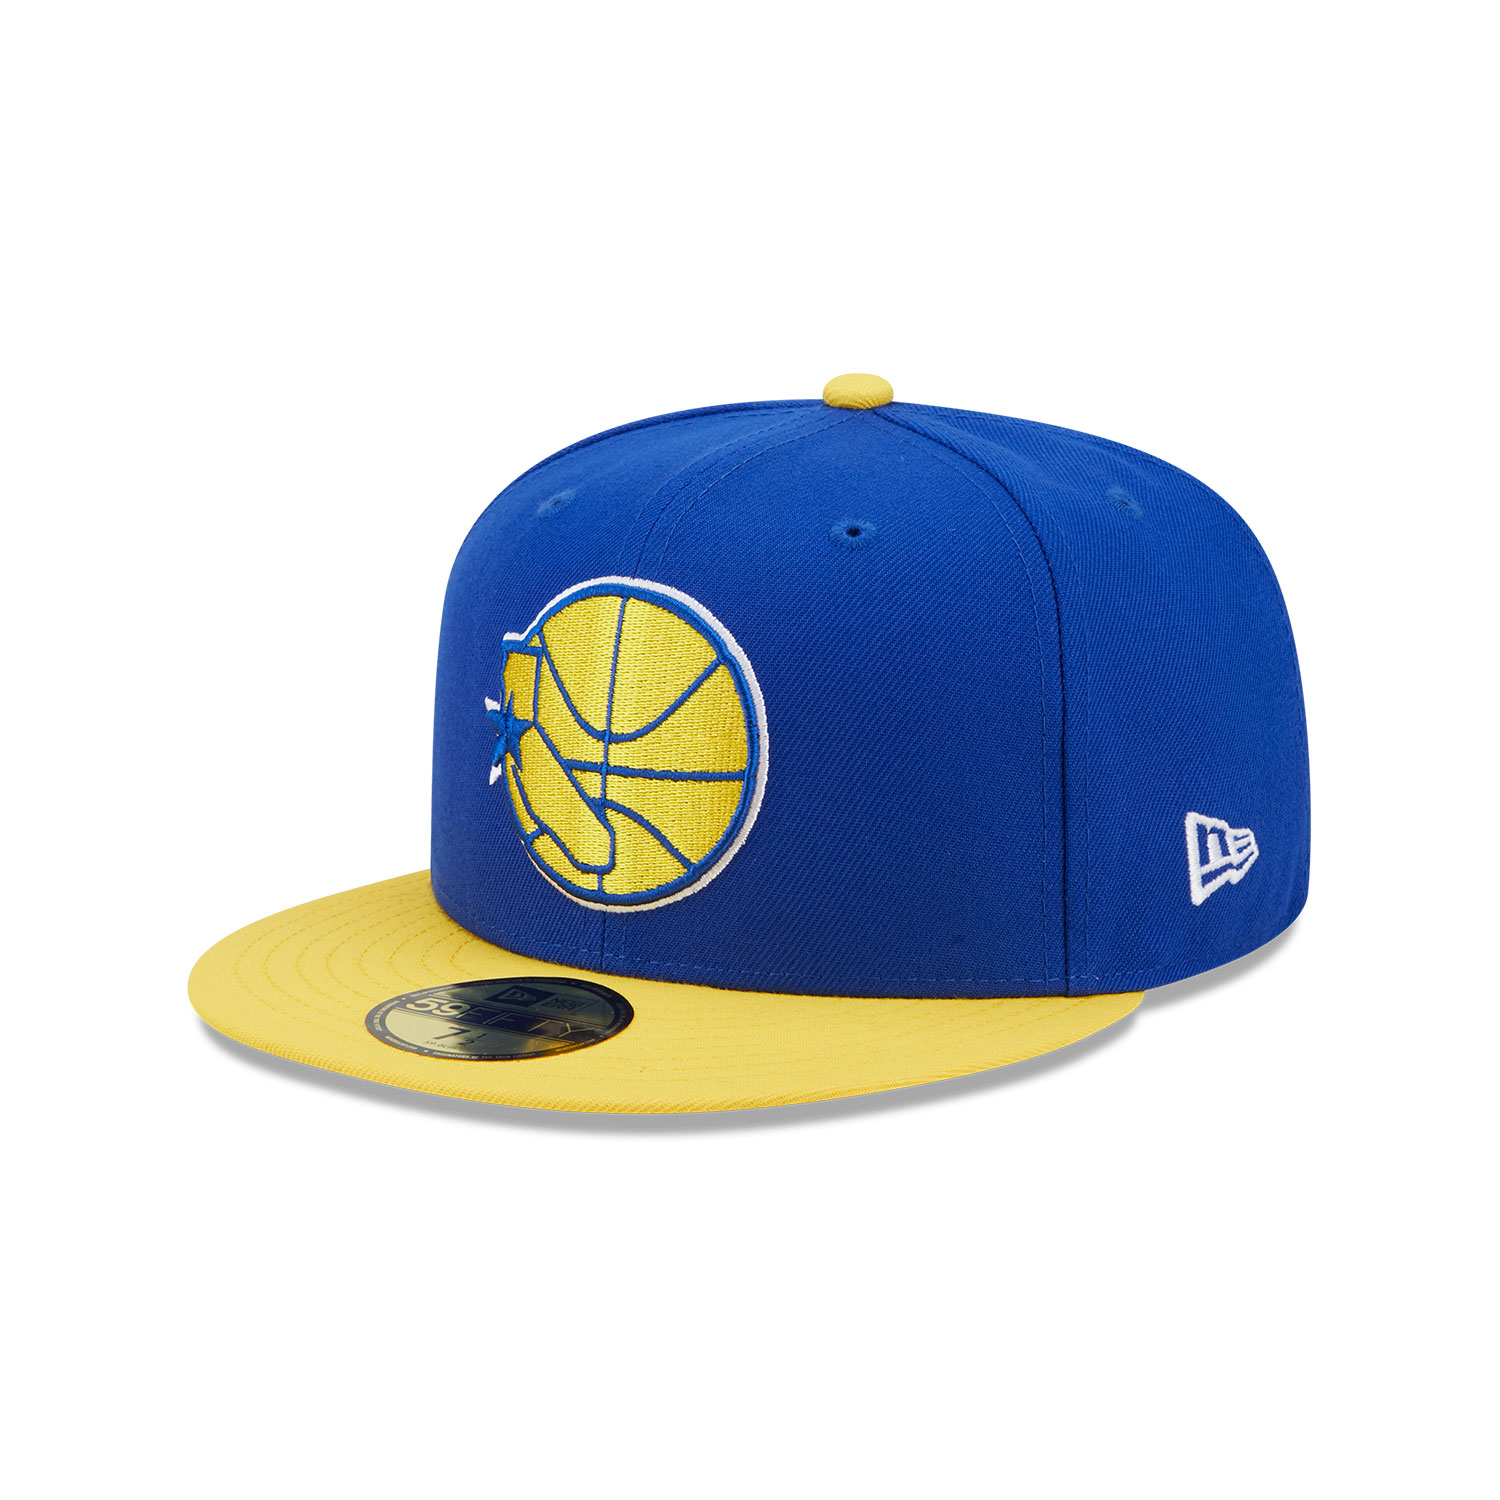 Golden State Warriors NBA Classic Blue 59FIFTY Fitted Cap